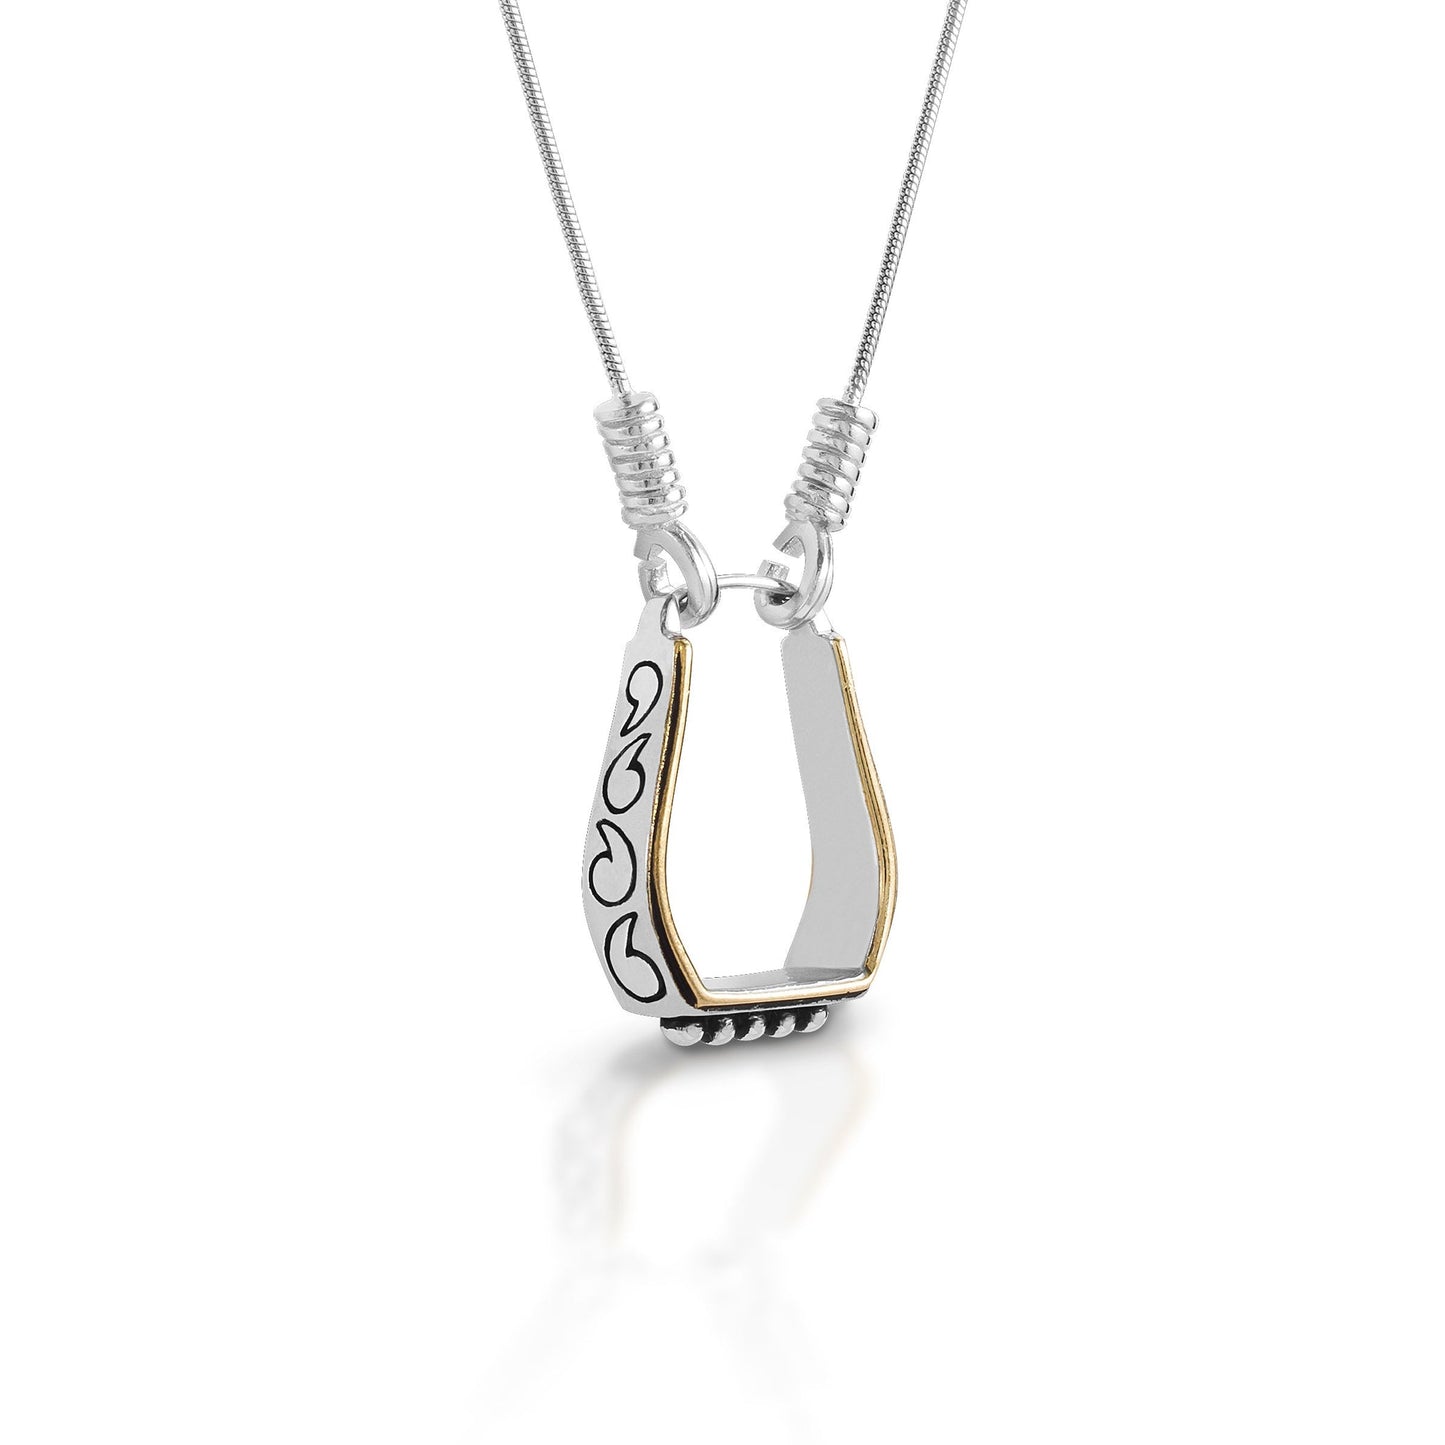 KELLY HERD TWO TONE ENGRAVED WESTERN STIRRUP NECKLACE - STERLING SILVER #12Q